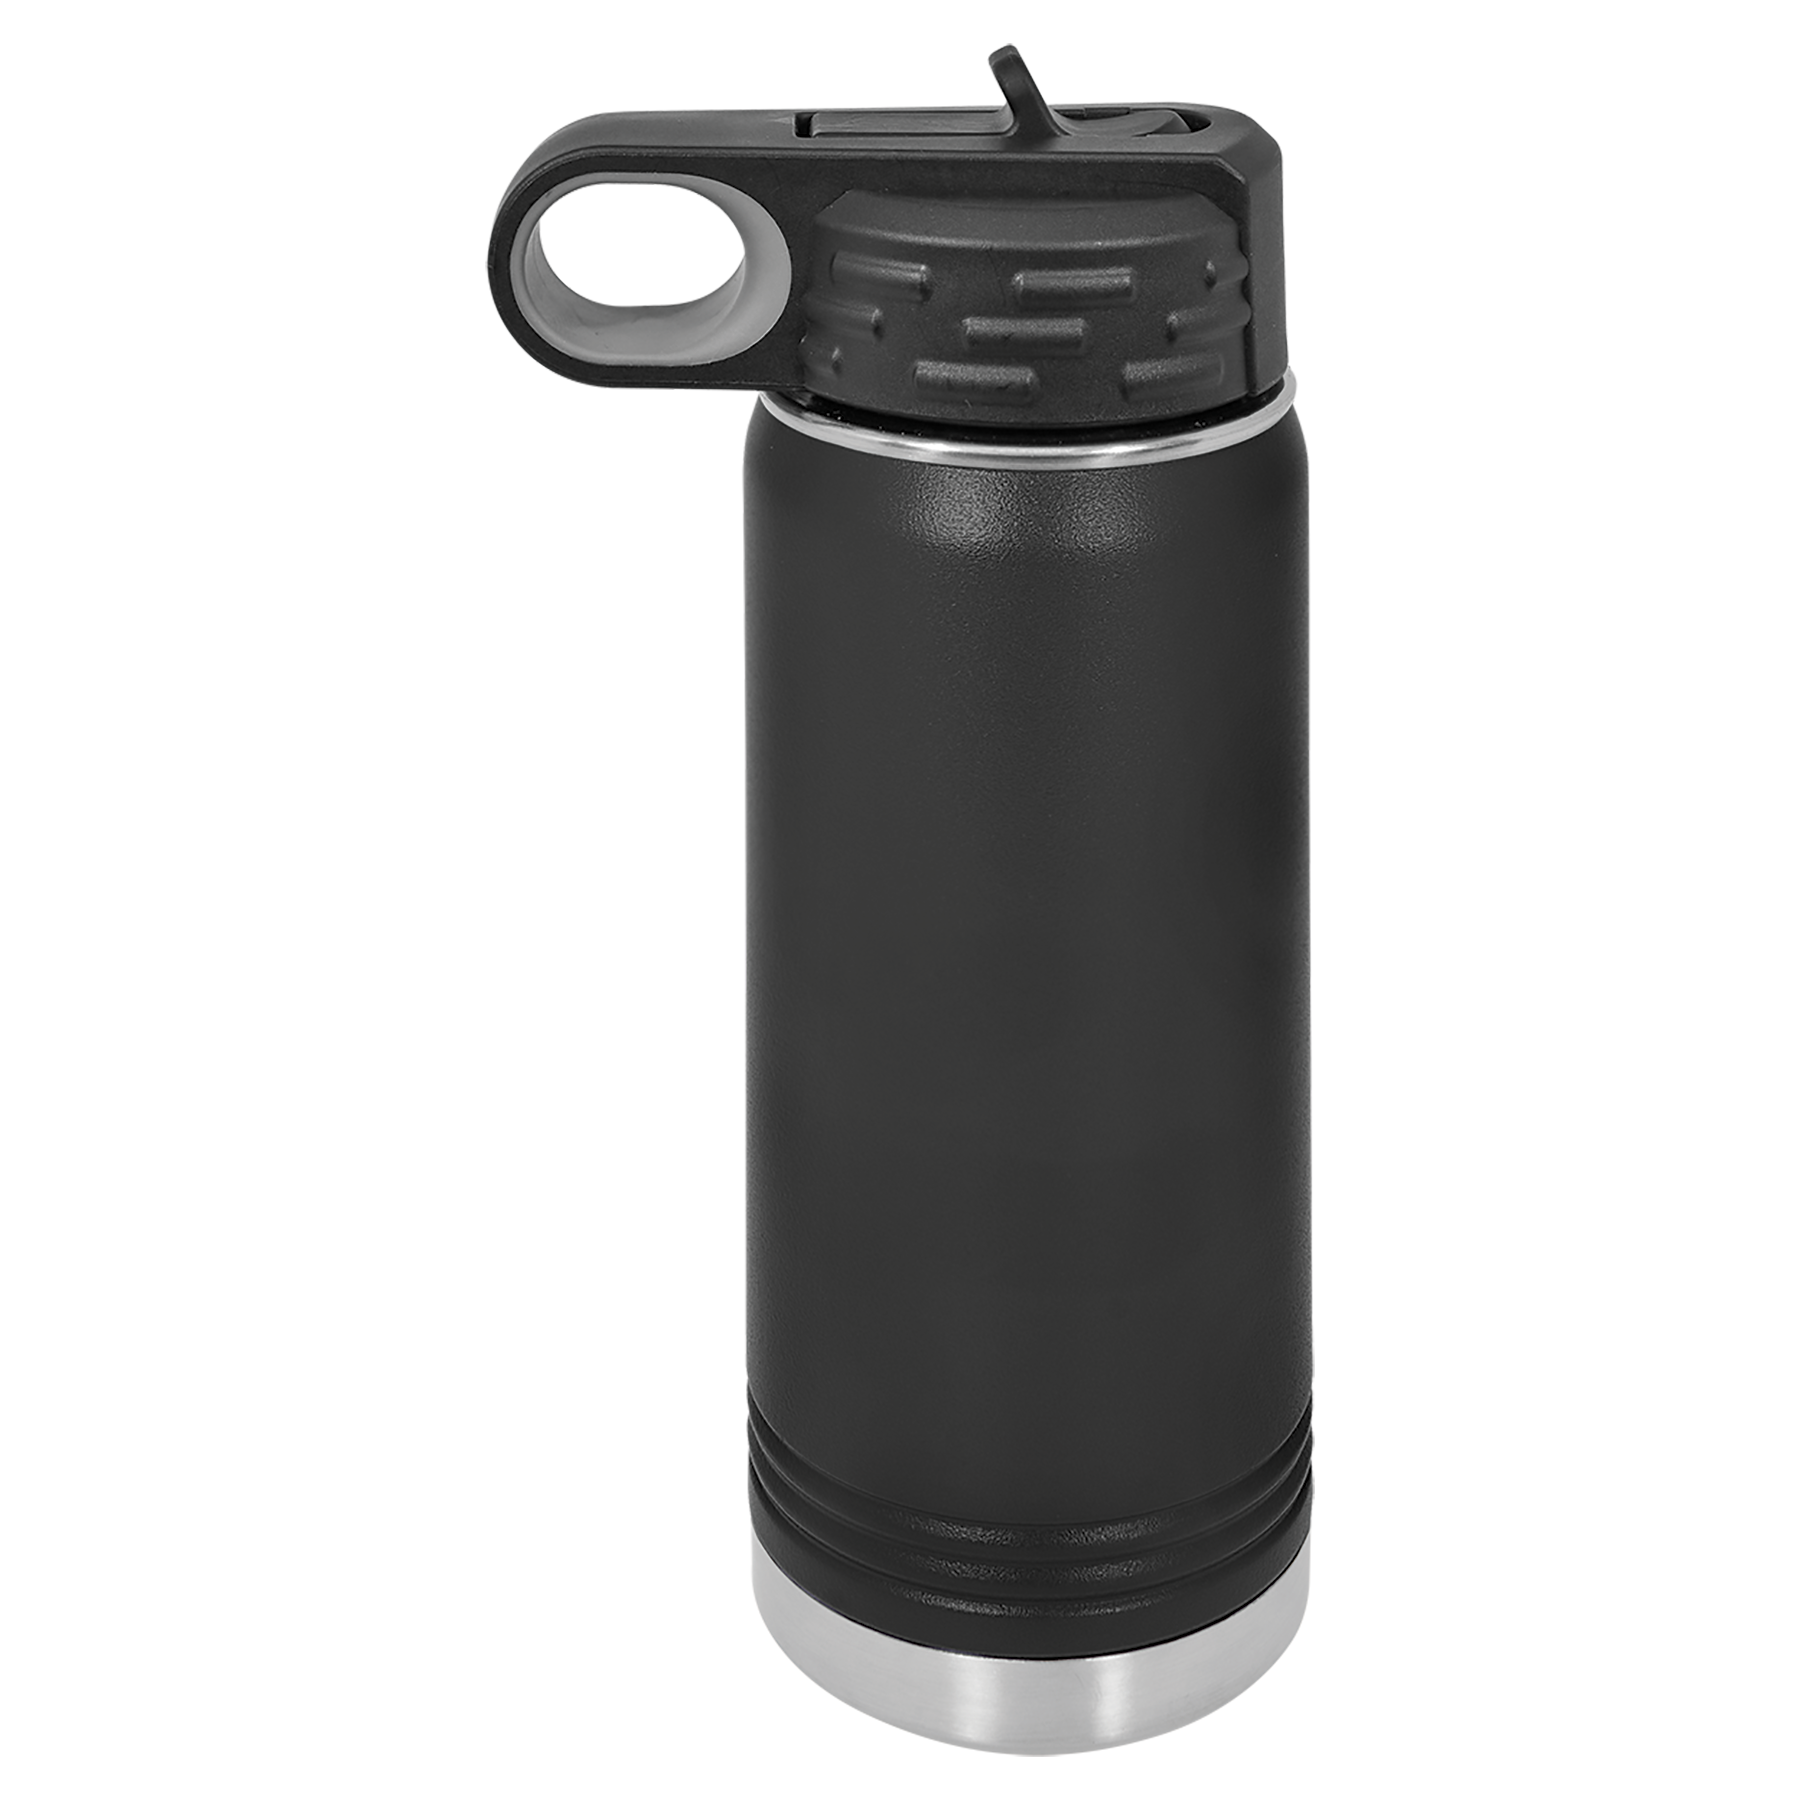 Black 20oz Water Bottle -One Free Engraving   -Double-wall Vacuum Insulated  -Made from 18/8 Gauge Stainless Steel (Type 304 Food Grade)  -Lid is BPA Free (Hand Wash Only)  -Not recommended for Dishwasher  -Works with Cold and Hot Drinks  -18 Color Options  -Perfect for Personalized Gifts, Awards, Incentives, Swag & Fundraisers